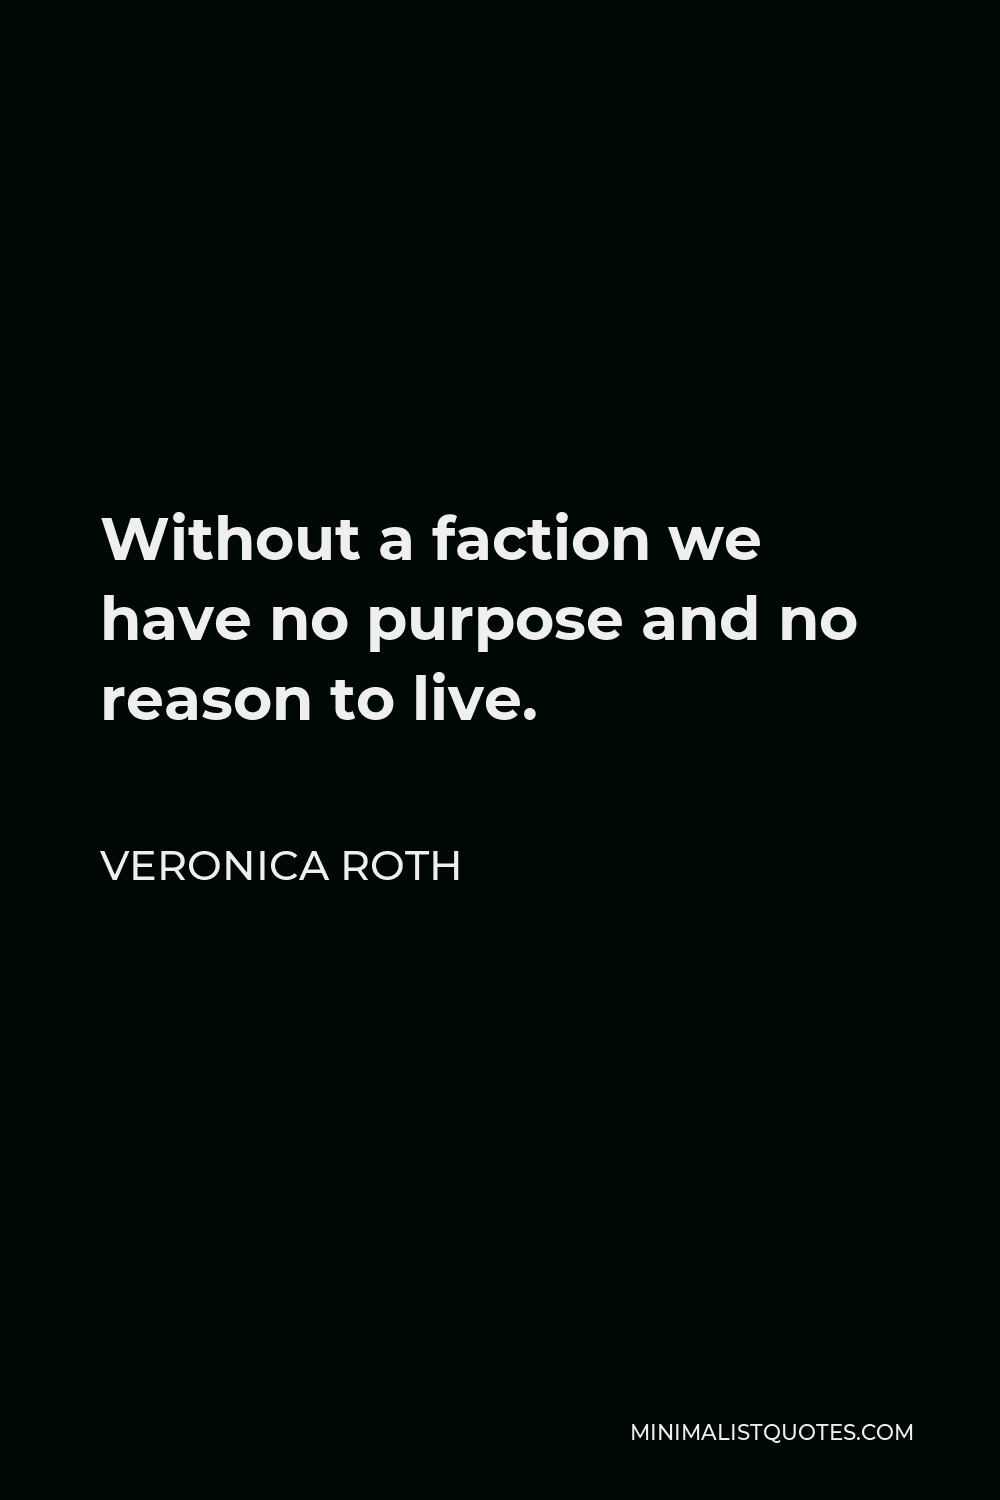 Veronica Roth Quote - Without a faction we have no purpose and no reason to live.